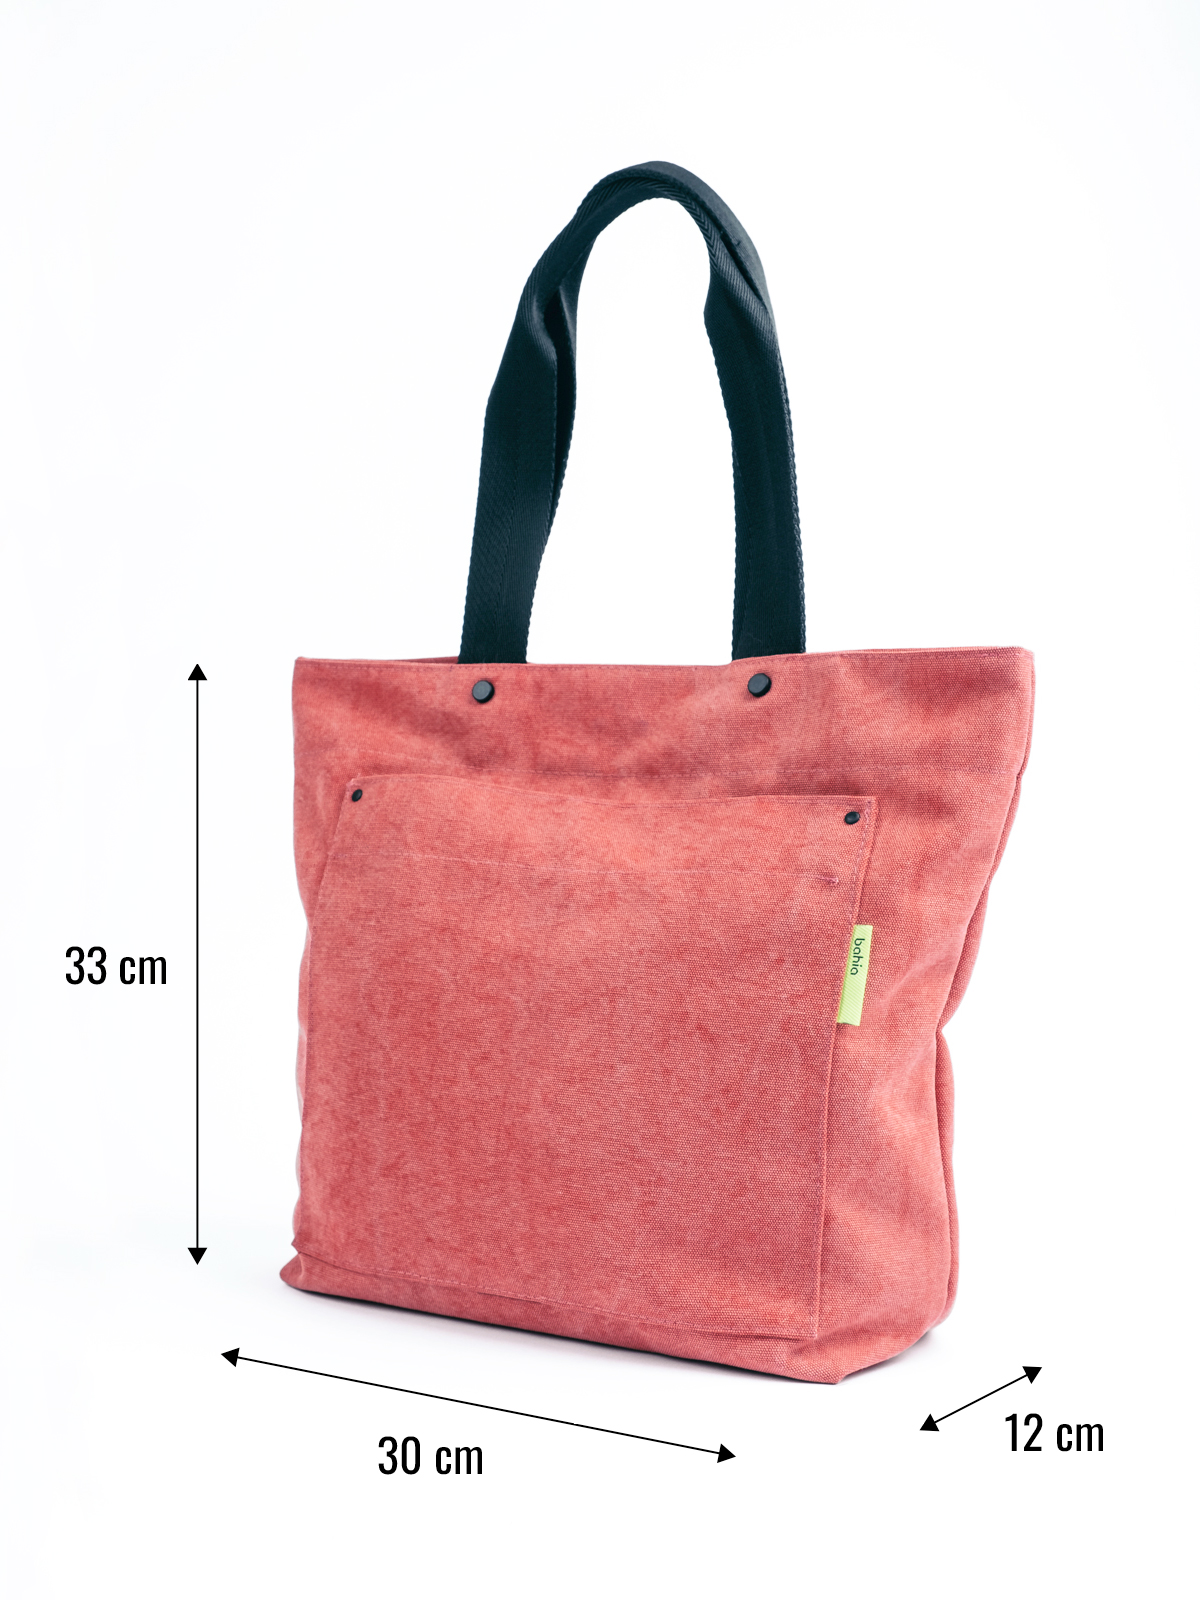 Gray recycled bag with yellow front pocket - Bahíabags